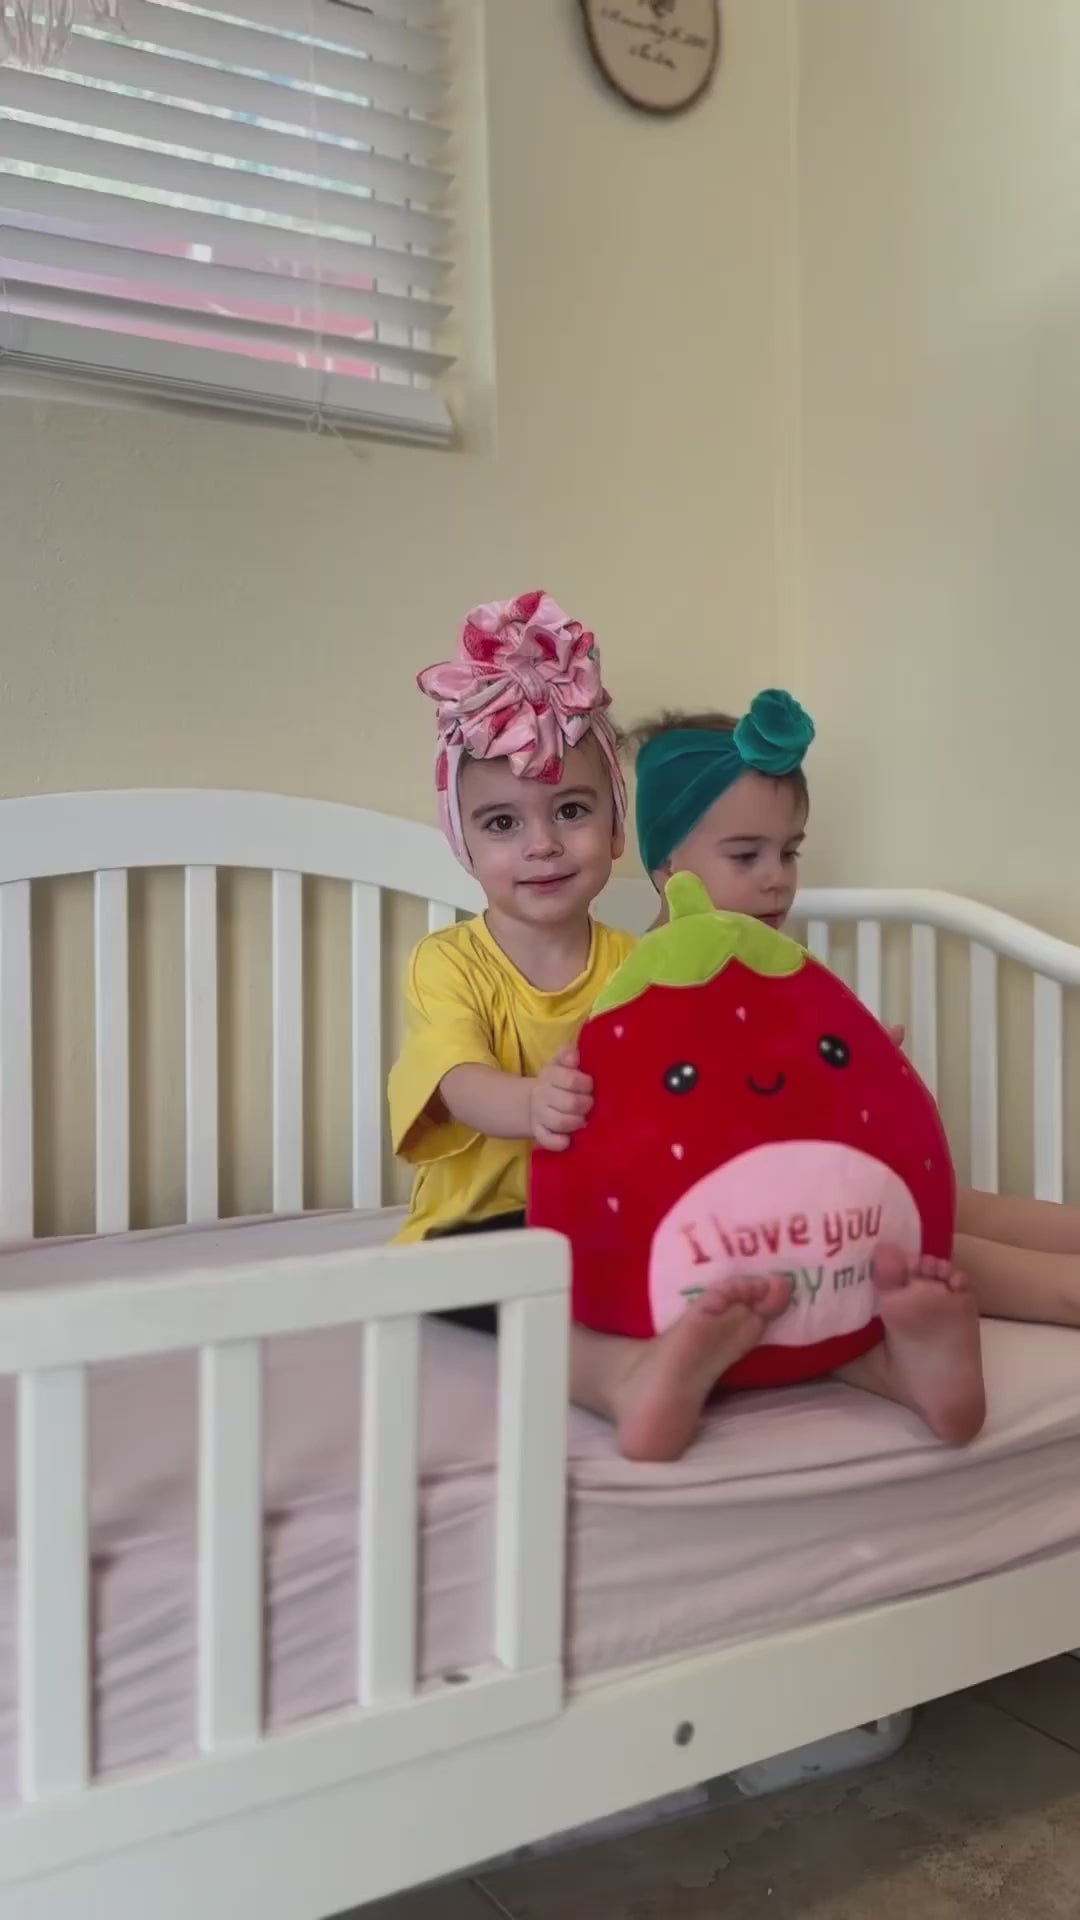 Take a look at this adorable strawberry plush toy! Every single detail has been designed to perfection and it effortlessly brings a fun vibe to any room decor. It's crafted from a super soft fabric and filled with squishy PP cotton that you'll love cuddling up with. Whether for kids or adults, this plush toy makes an excellent gift.